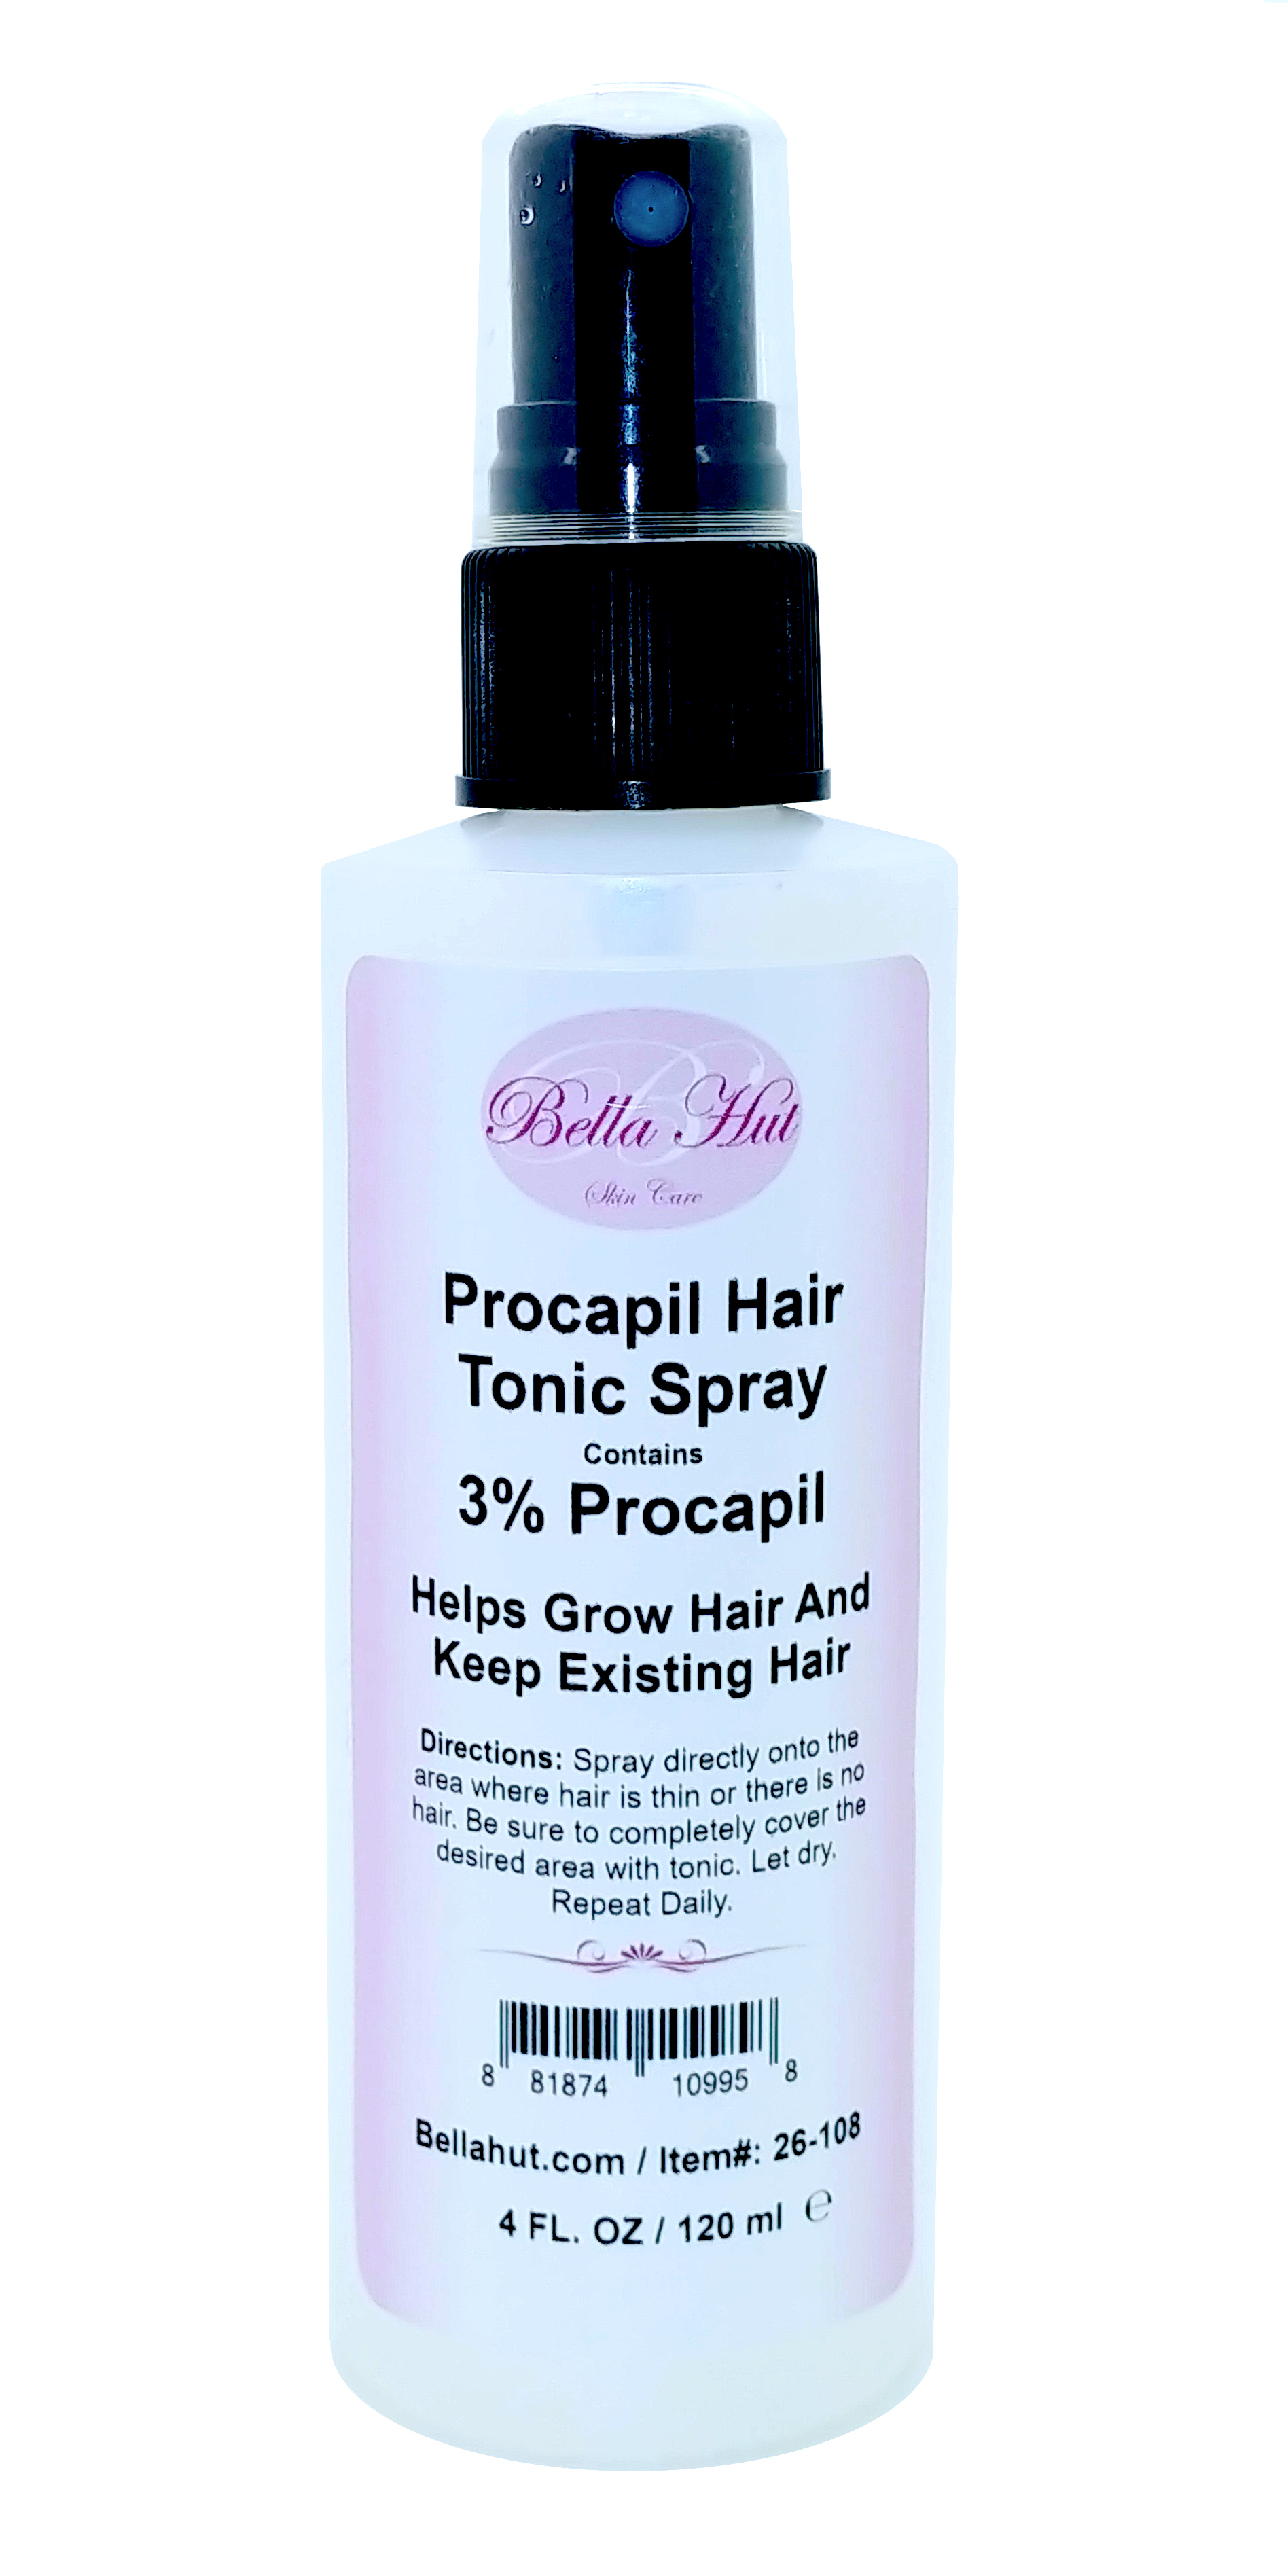 A hair tonic containing procapil to help with the reduction of hair loss and to help regrow hair